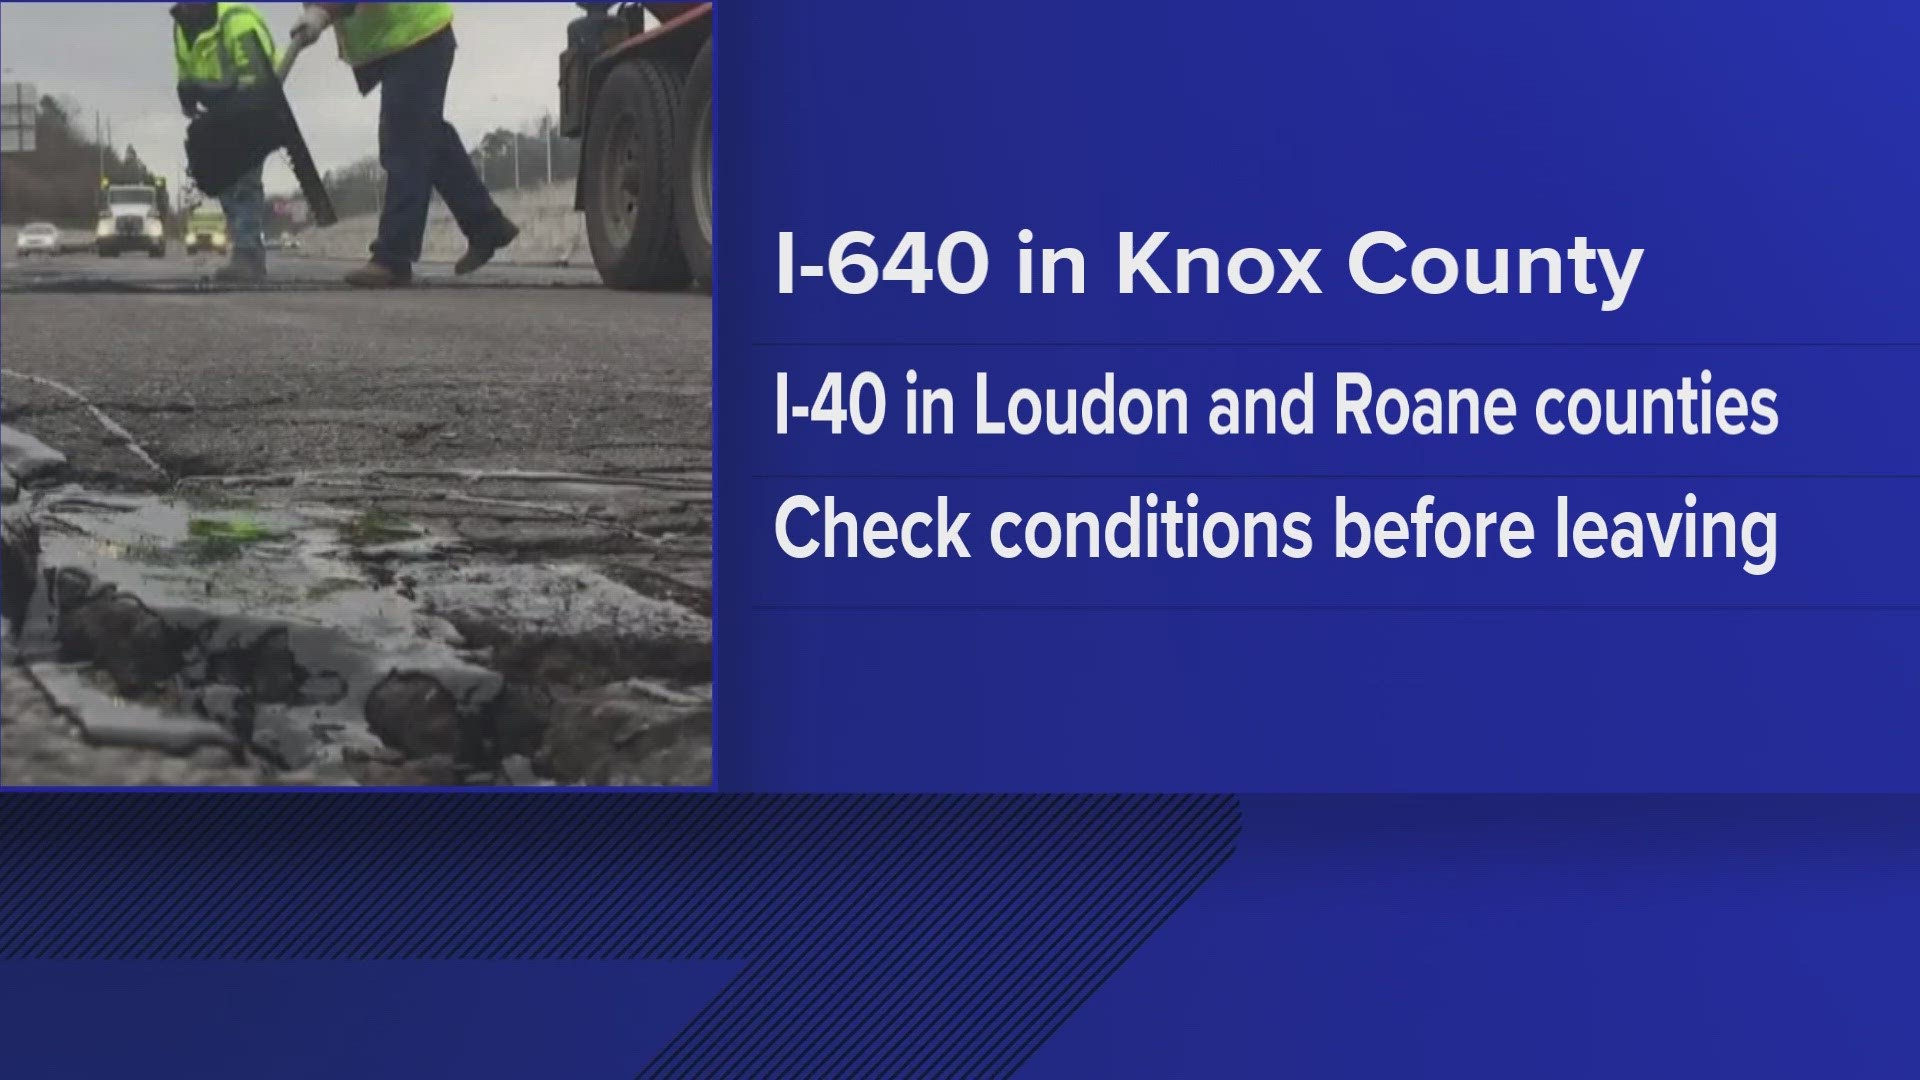 Crews will be working in several different East Tennessee counties to patch potholes as the roads thaw from a winter storm.